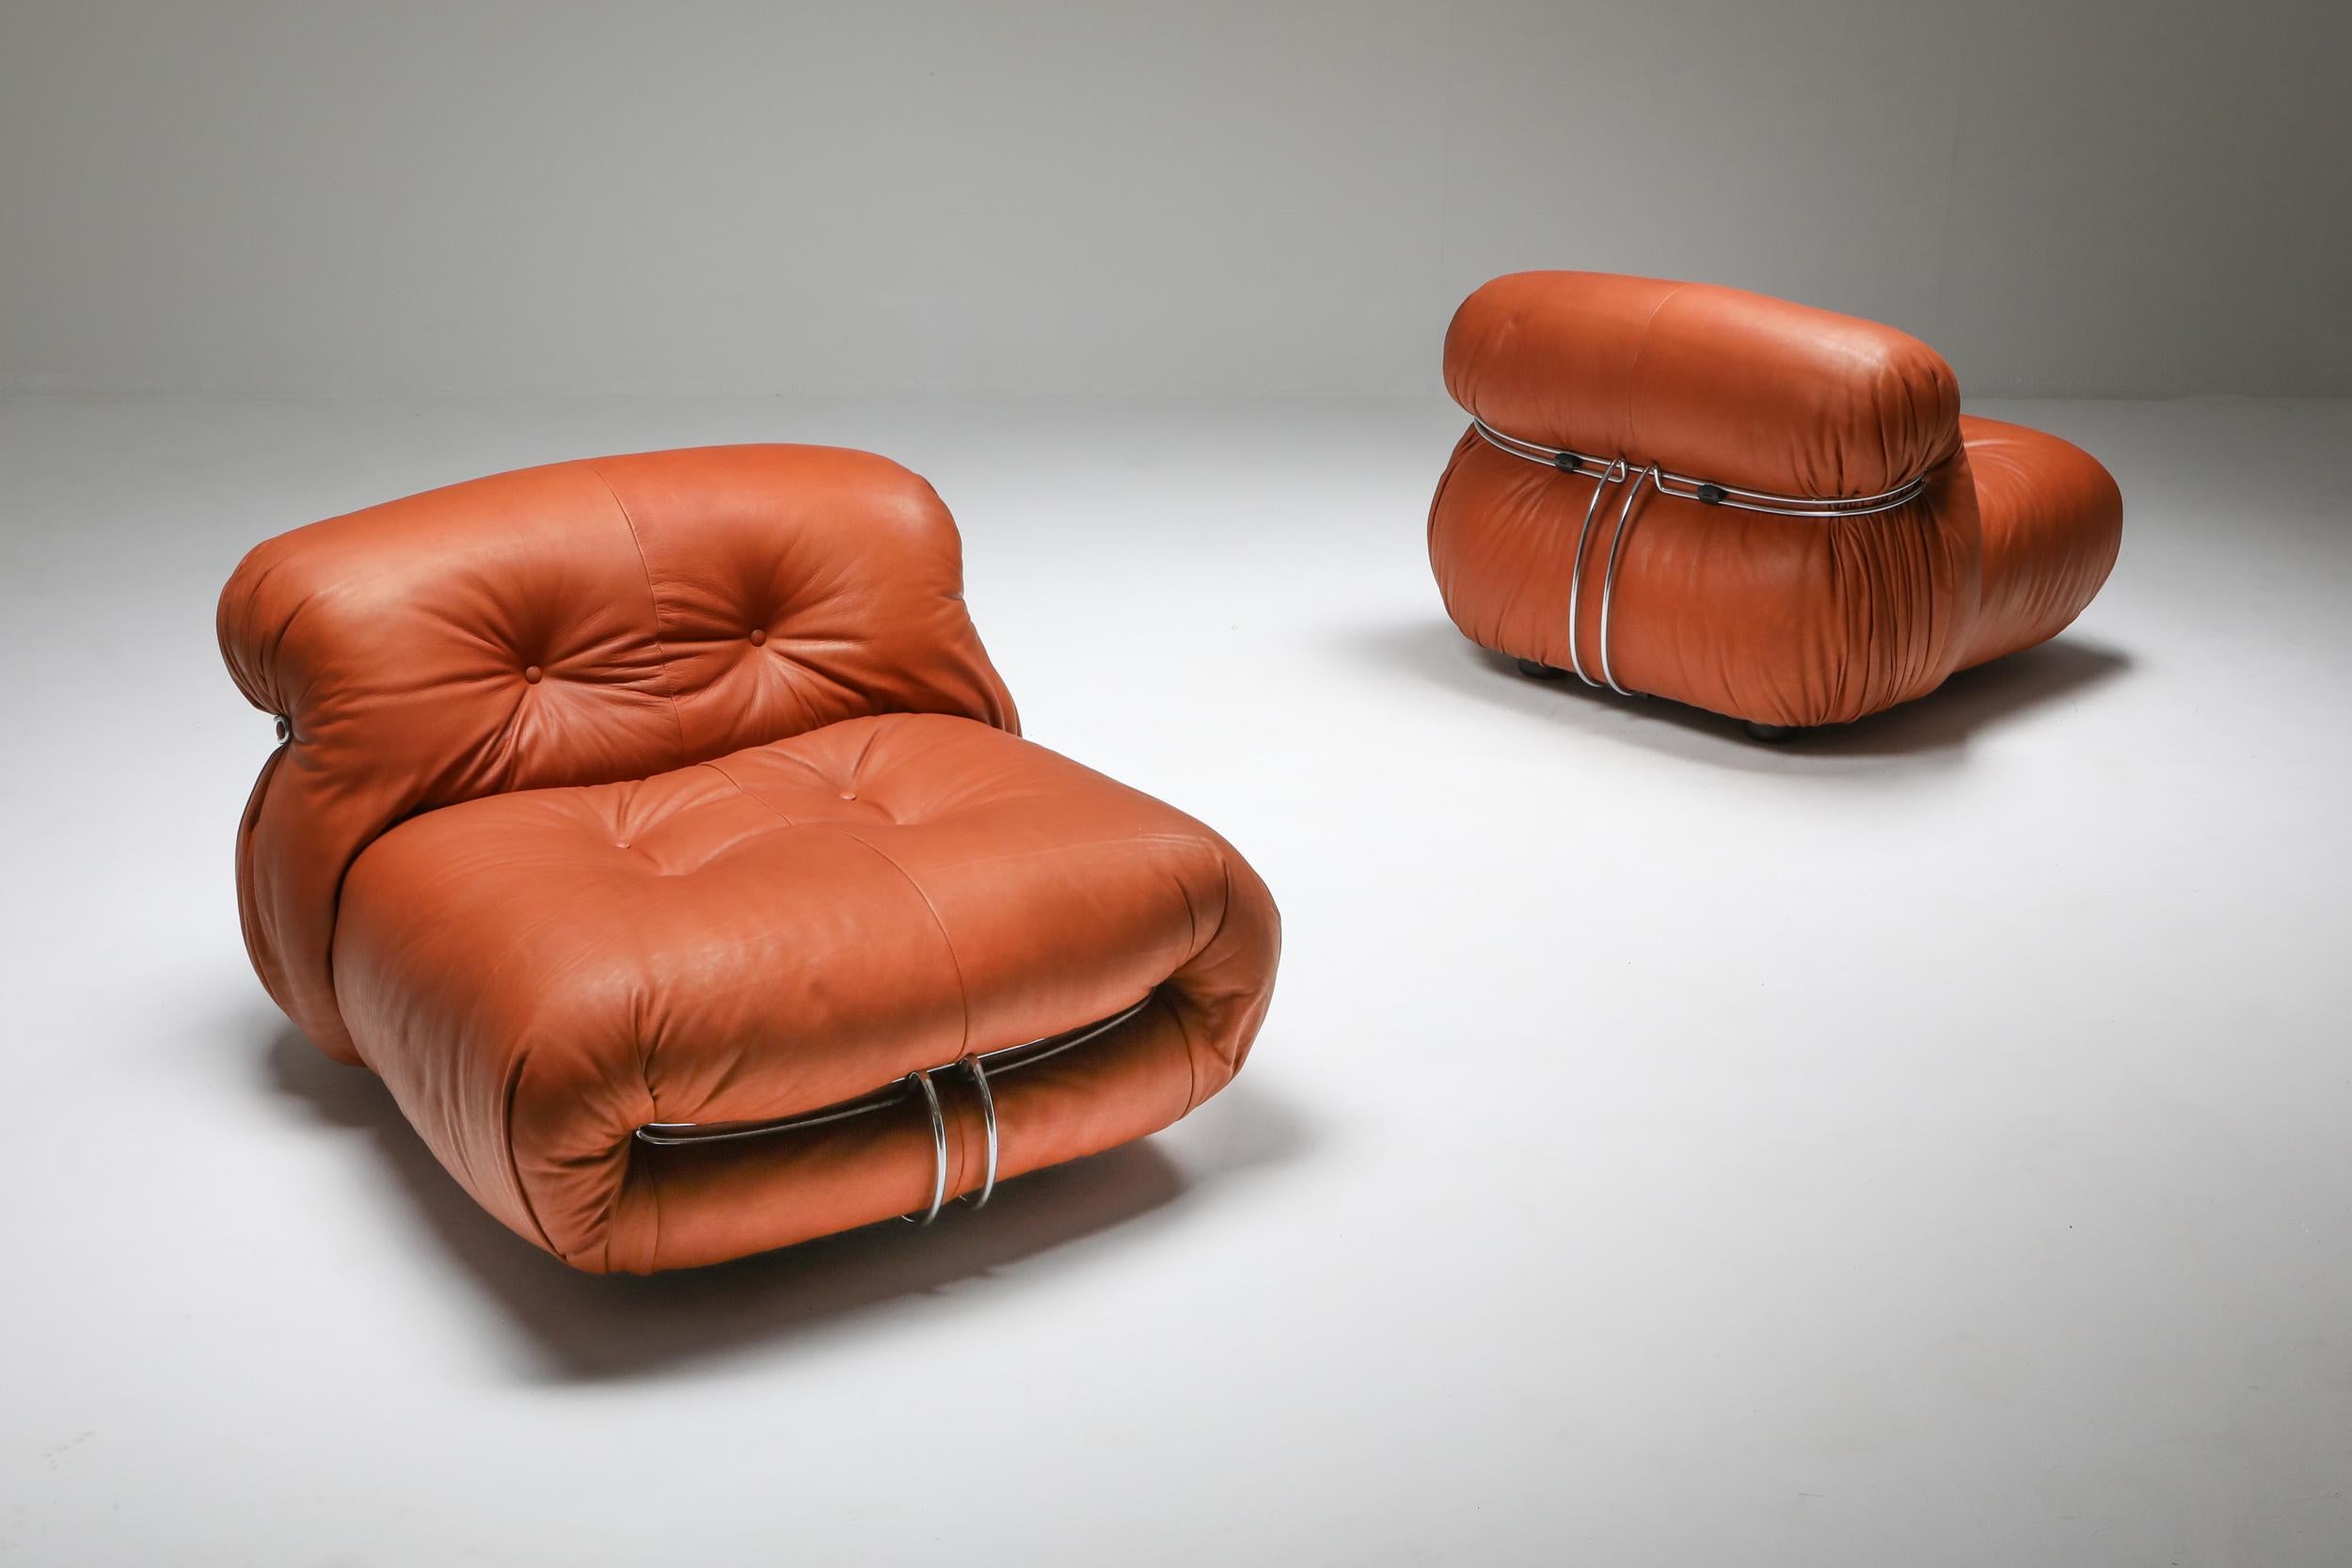 Scarpa; Afra and Tobia Scarpa; Cassina; Italy; 1970's; Hollywood Regency; Minimalist; Italian Design; 

Afra and Tobia Scarpa, reupholstered cognac aniline leather, Cassina, Italy, the 1970s
The Soriana collection was meant to express beauty and